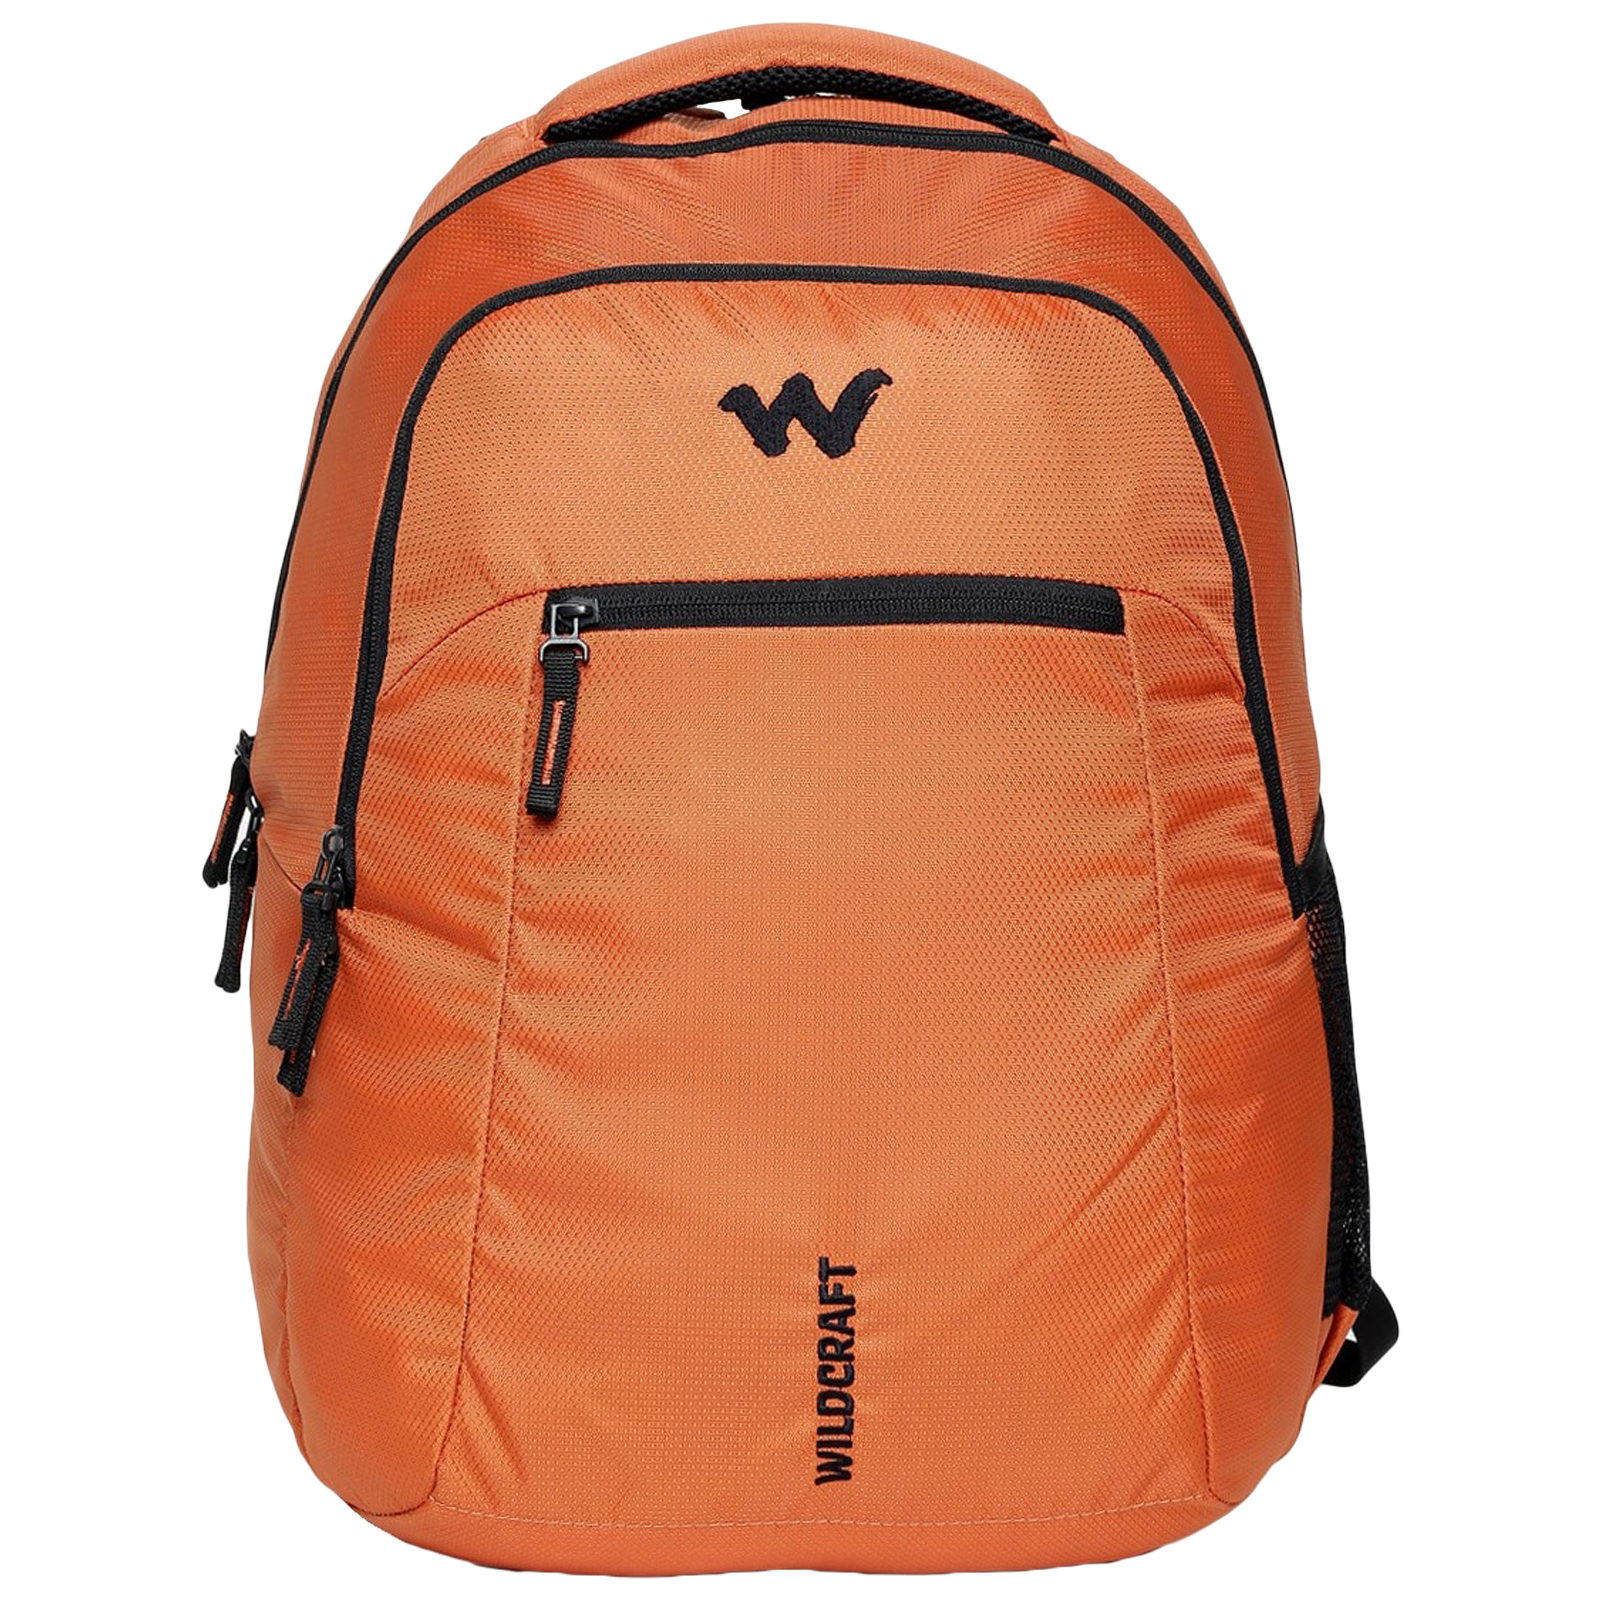 Wildcraft Laptop Bags - wild craft laptop bags Price Starting From Rs 2,207  | Find Verified Sellers at Justdial